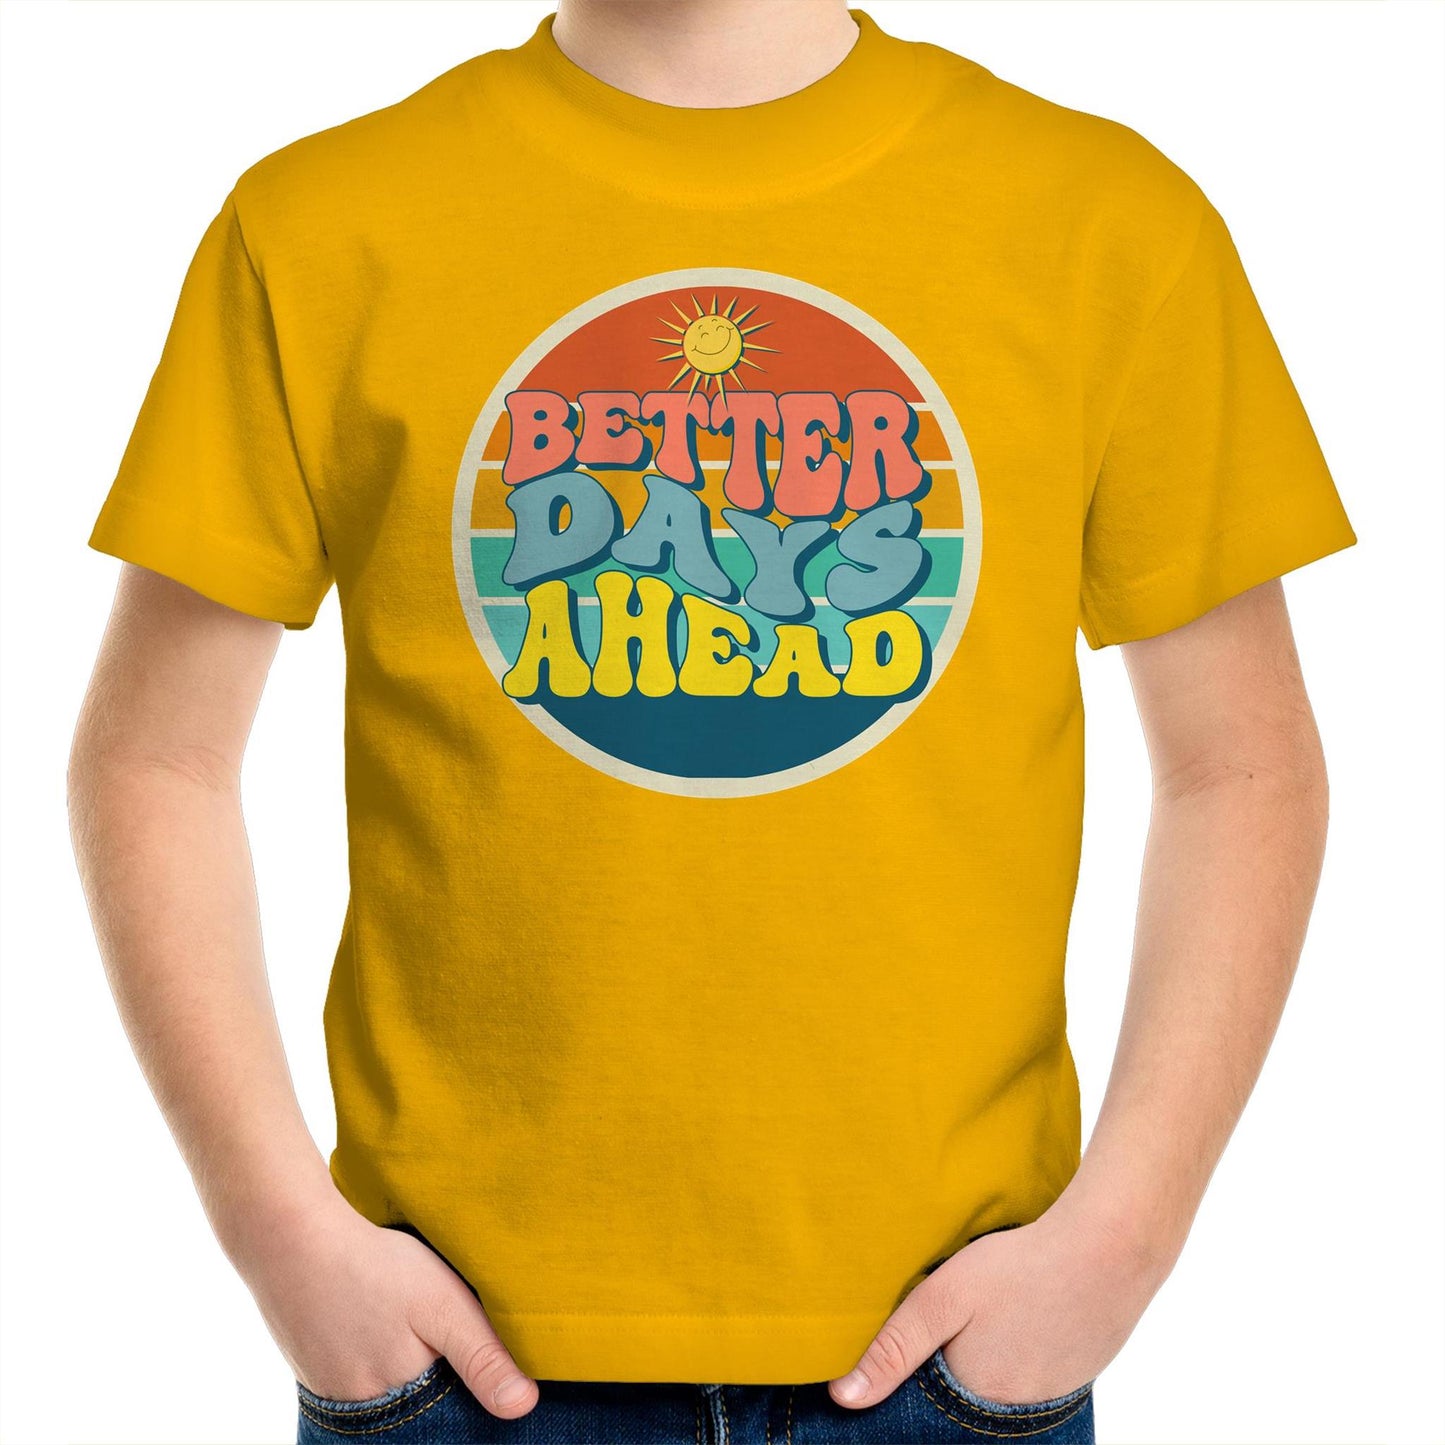 Better Days Ahead - Kids Youth T-Shirt Gold Kids Youth T-shirt Motivation Retro